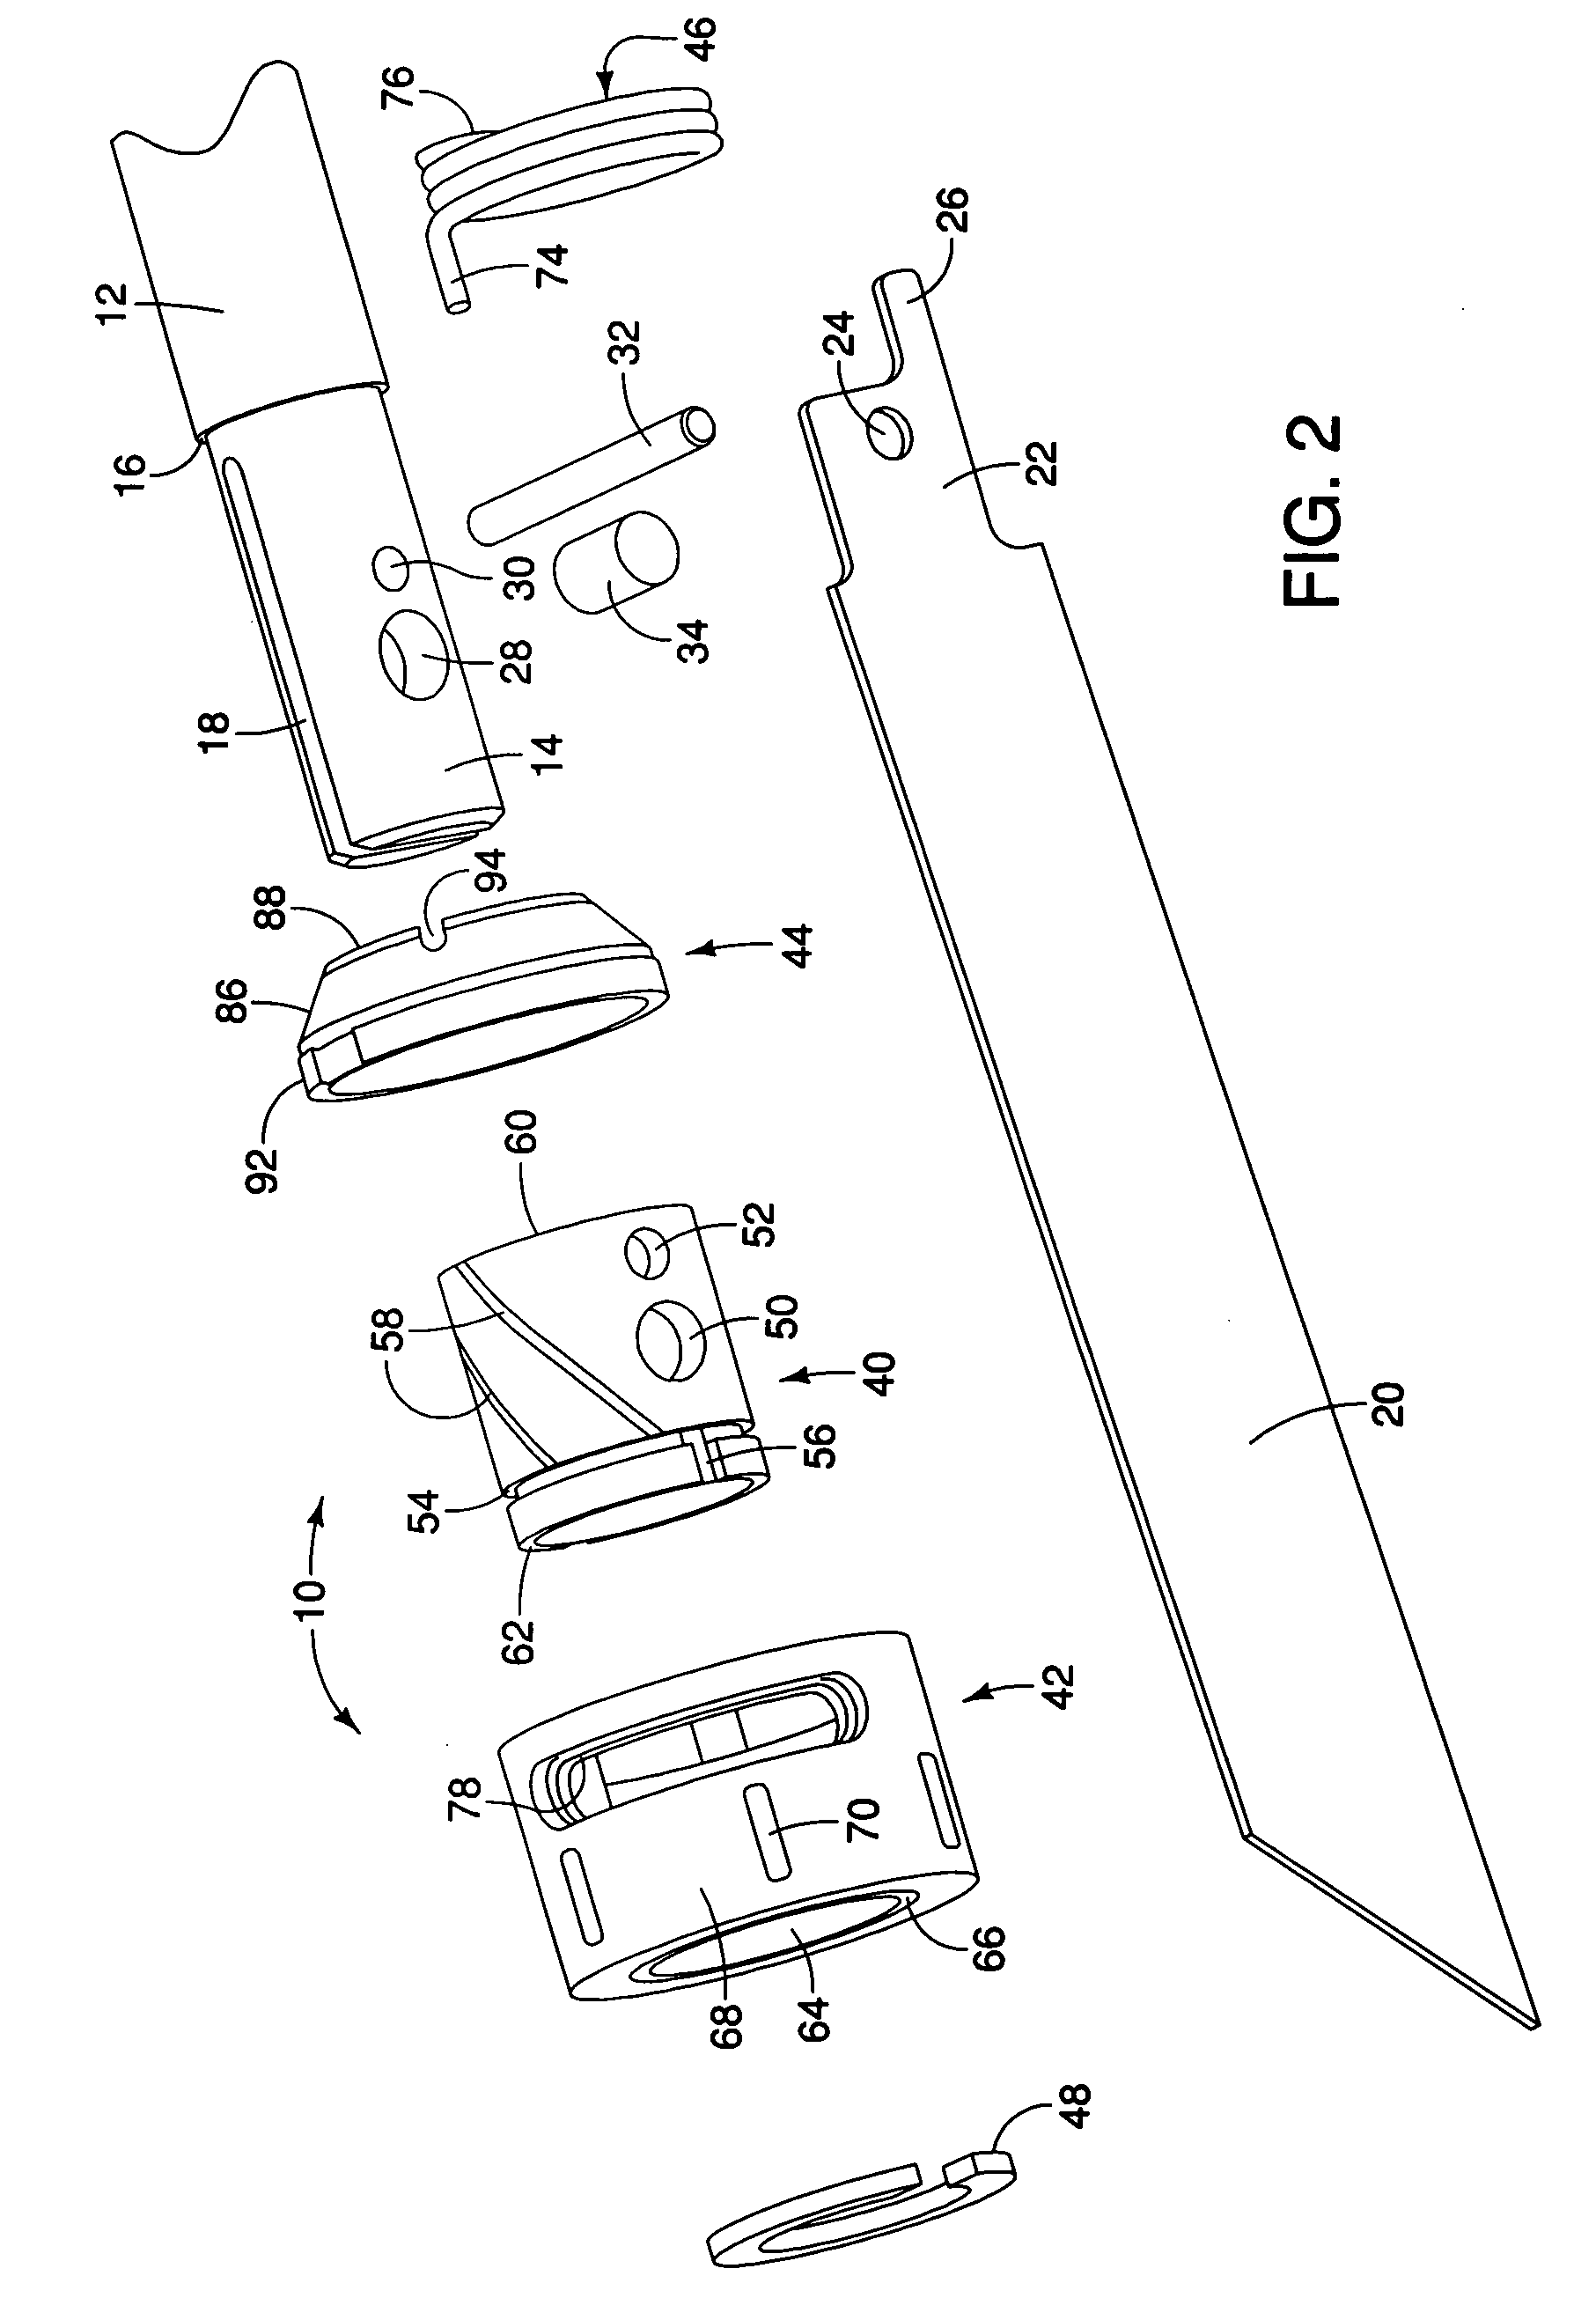 Clamping apparatus for a reciprocating tool